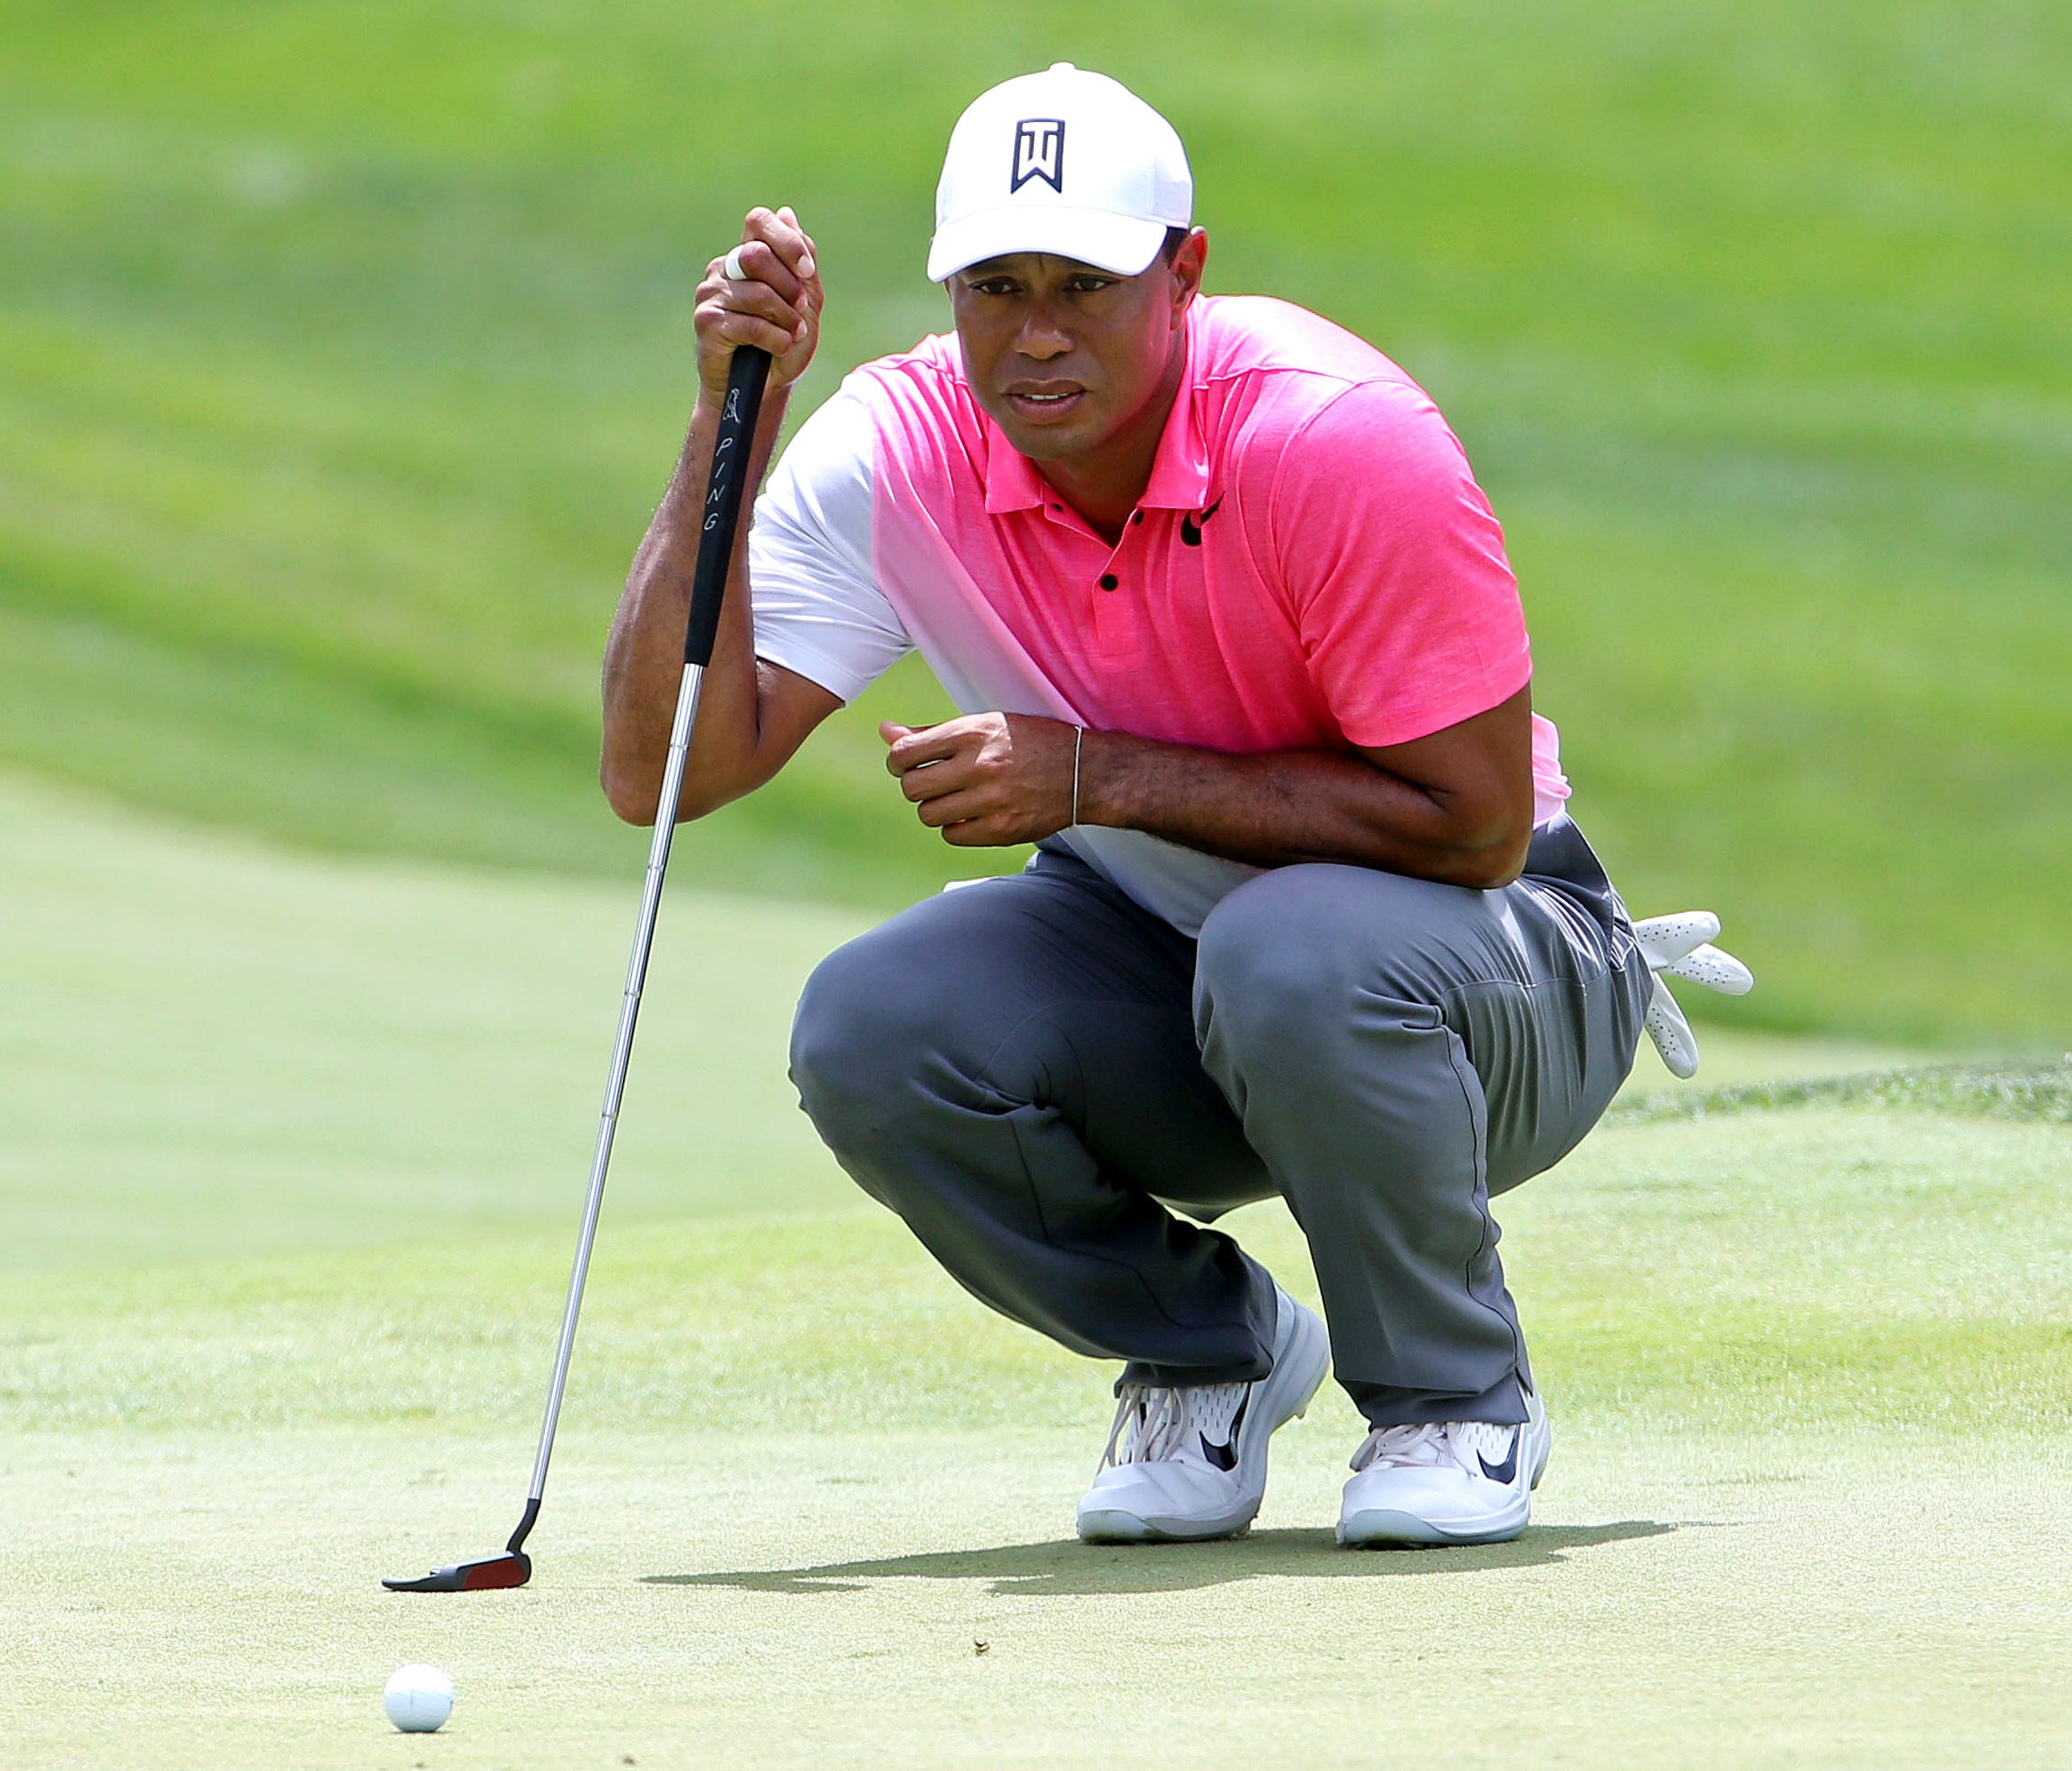 Tiger Woods lines up his putt on the first green during the first round of the Quicken Loans National golf tournament at TPC Potomac at Avenel Farm.